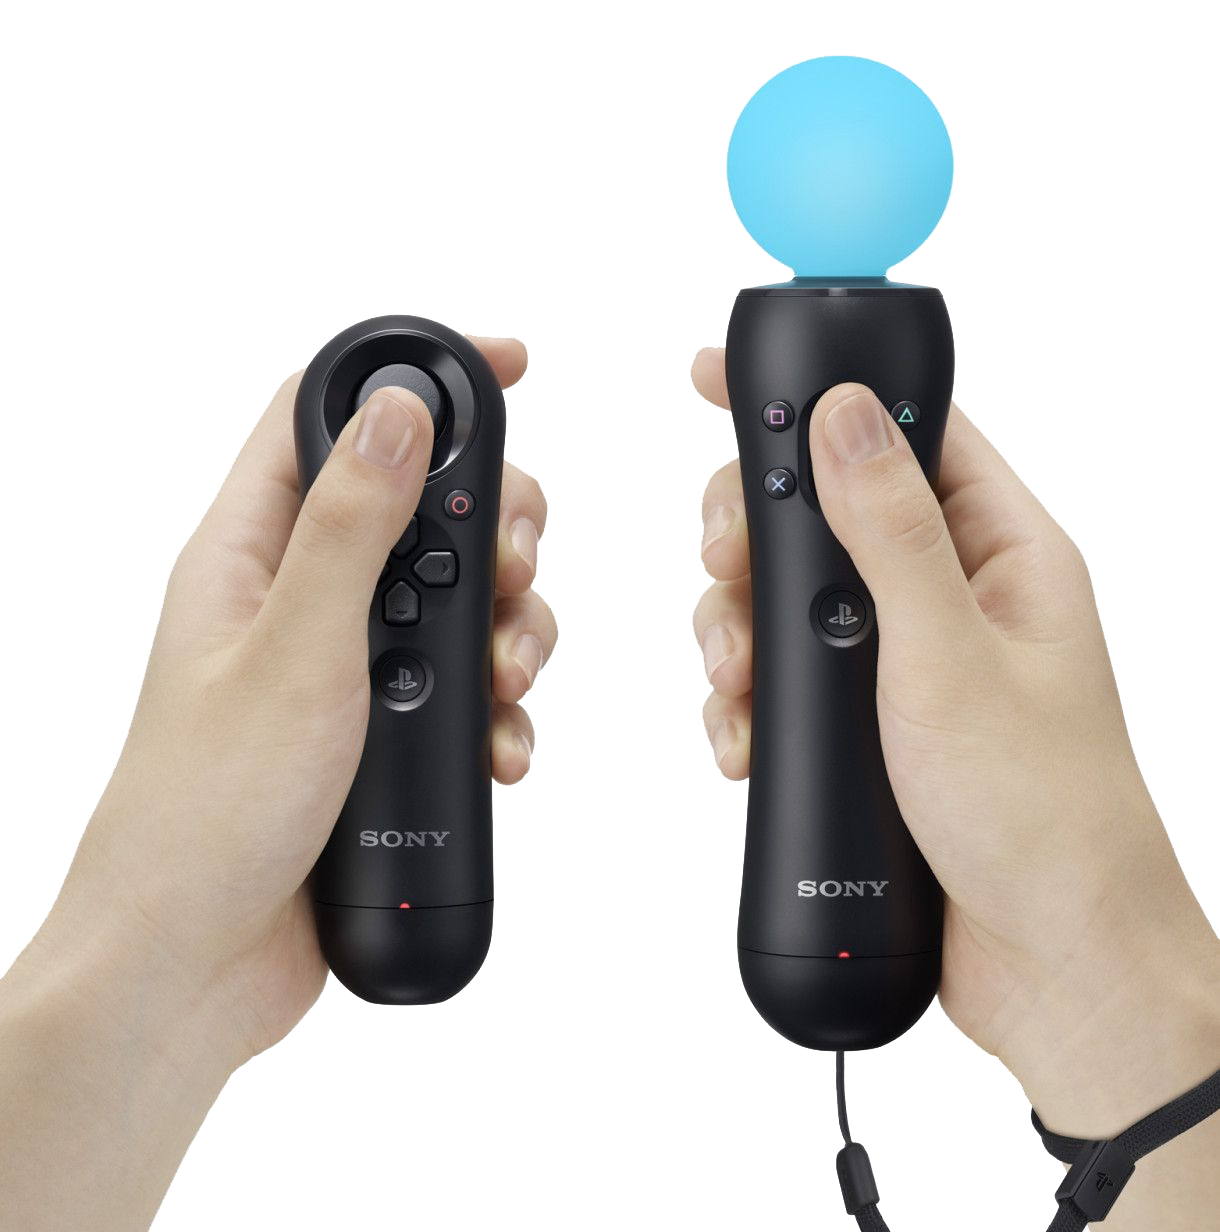 Game stick как называется. Sony ps4 move Motion Controller. Sony Motion Controller ps4. Контроллер Sony PLAYSTATION 3 move. Контроллеры PS move от Sony PS.